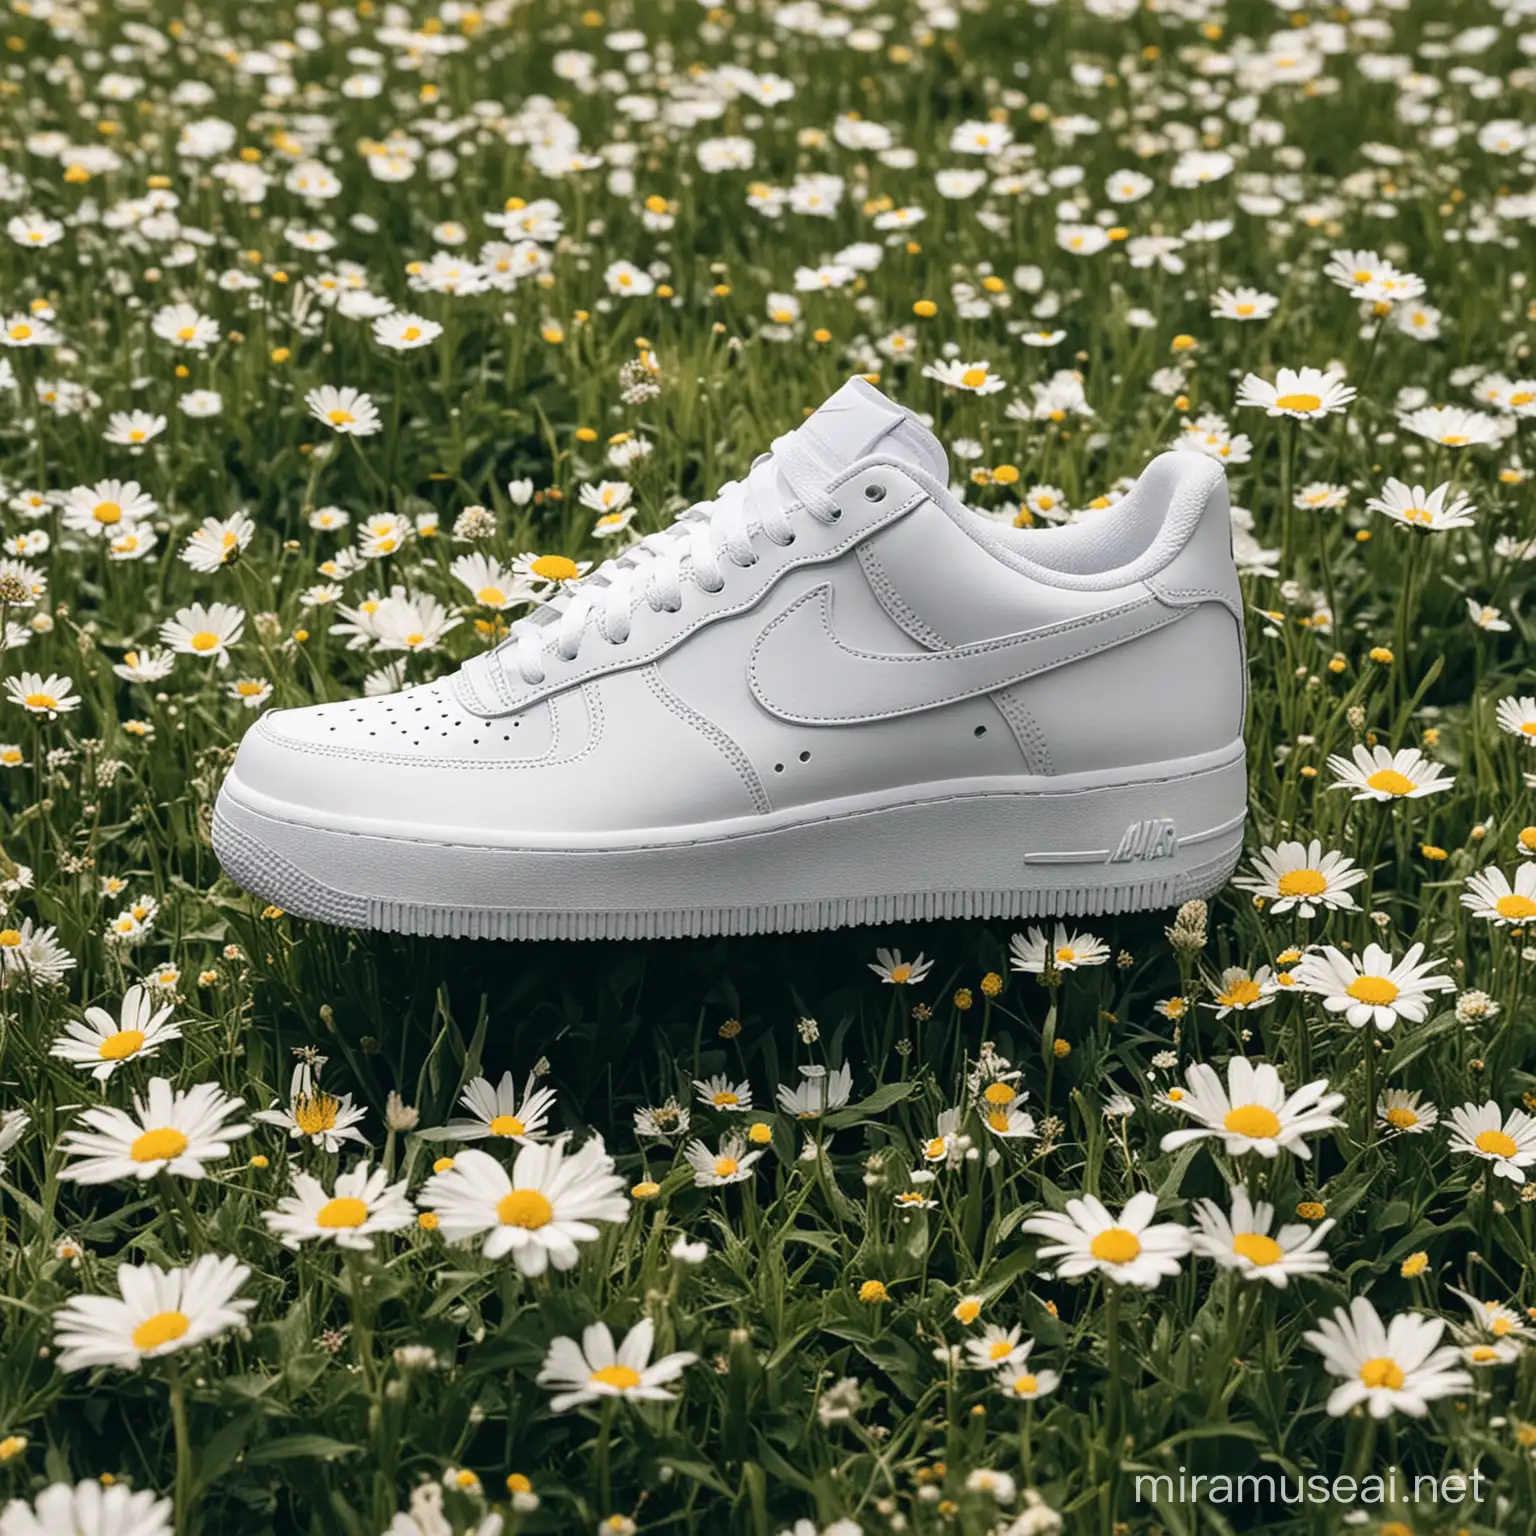 Nike Air Force All White Shoe on Meadow with Flower Accents